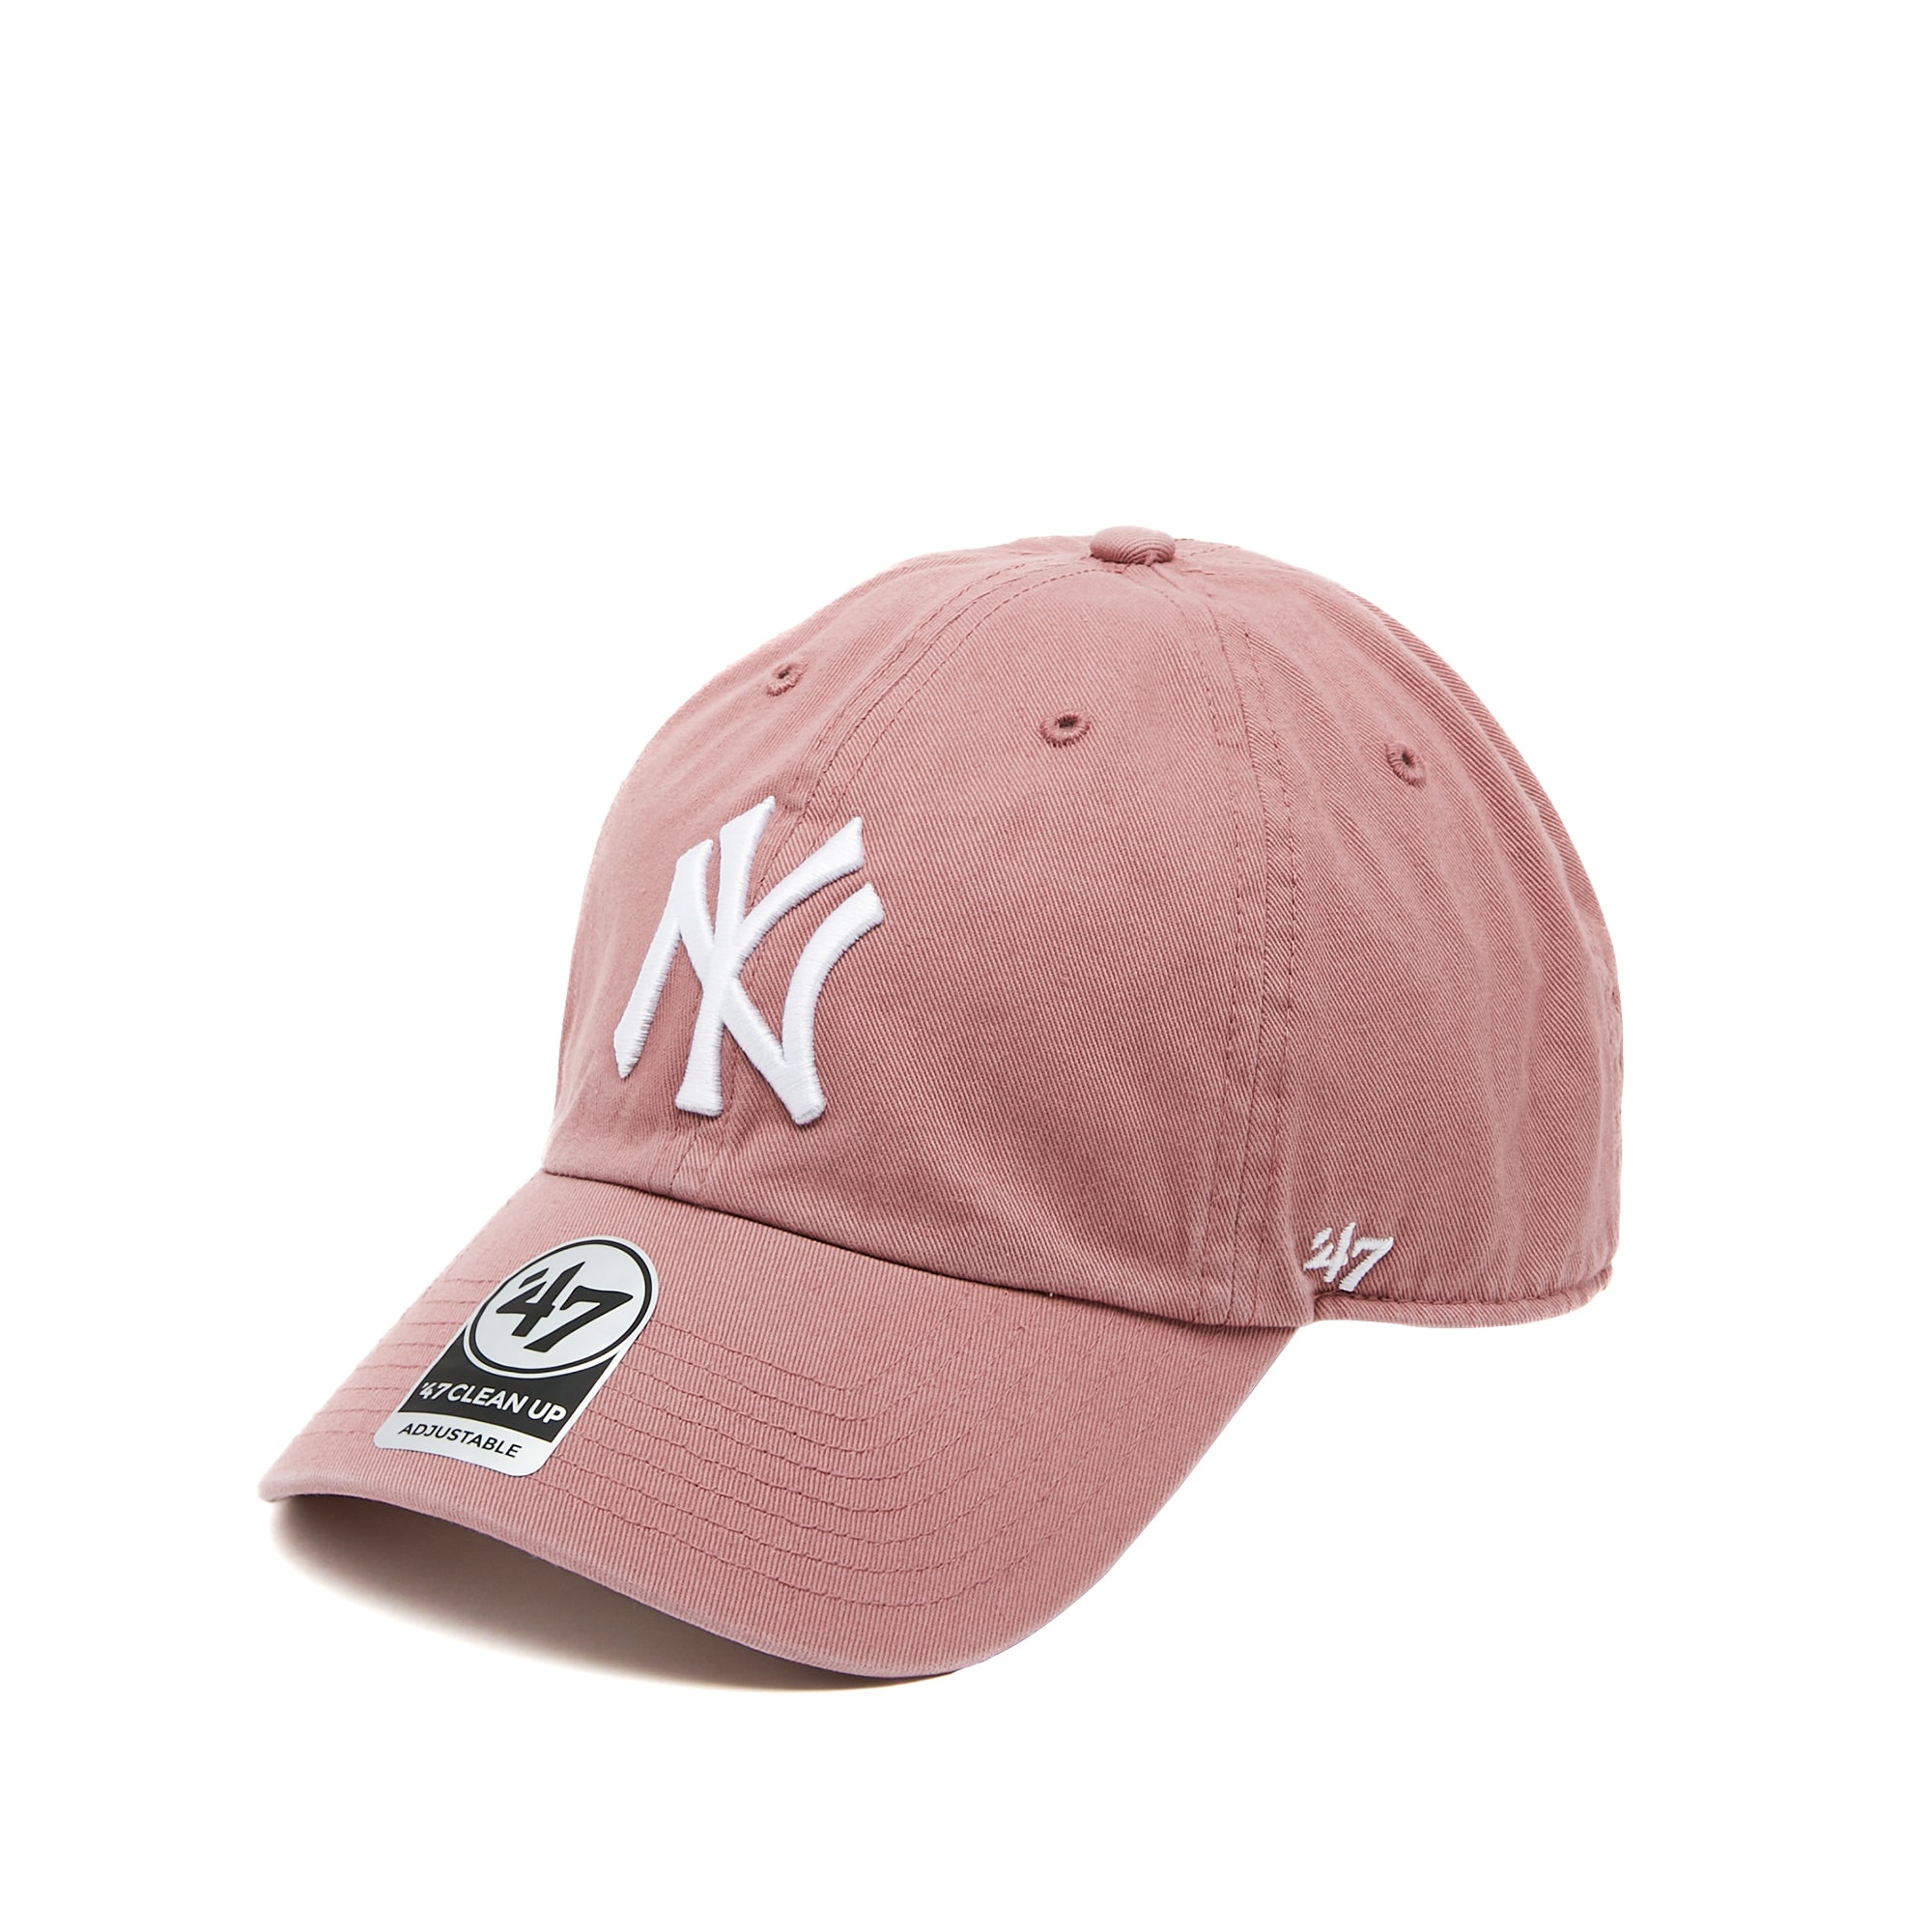 MLB New York Yankees '47 Clean Up Cap Mauve One Size